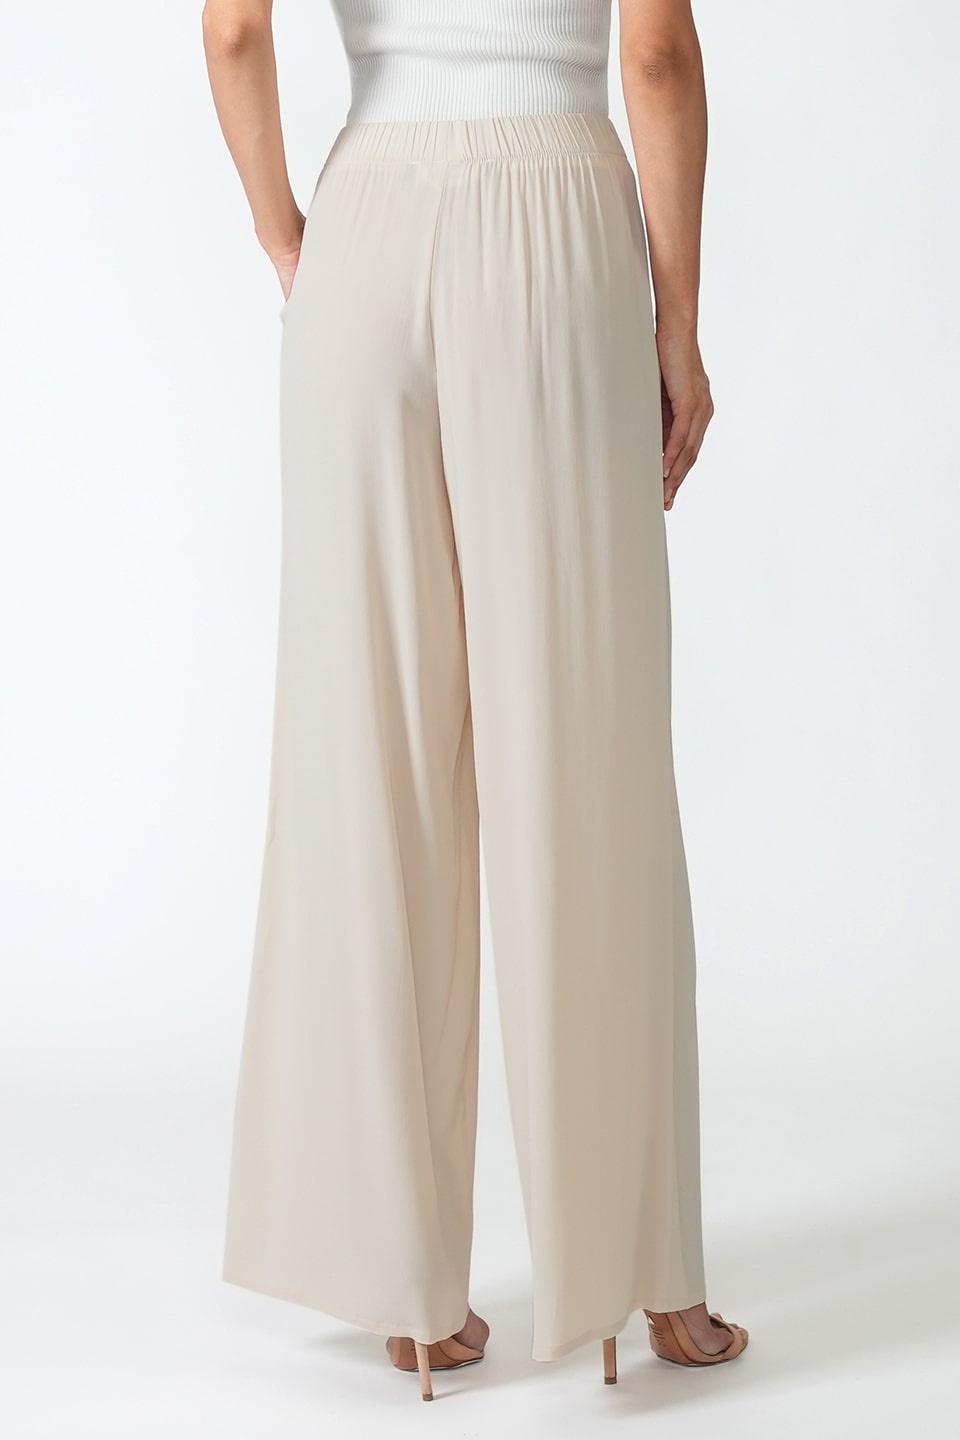 Designer Ivory Women pants, shop online with free delivery in UAE. Product gallery 5